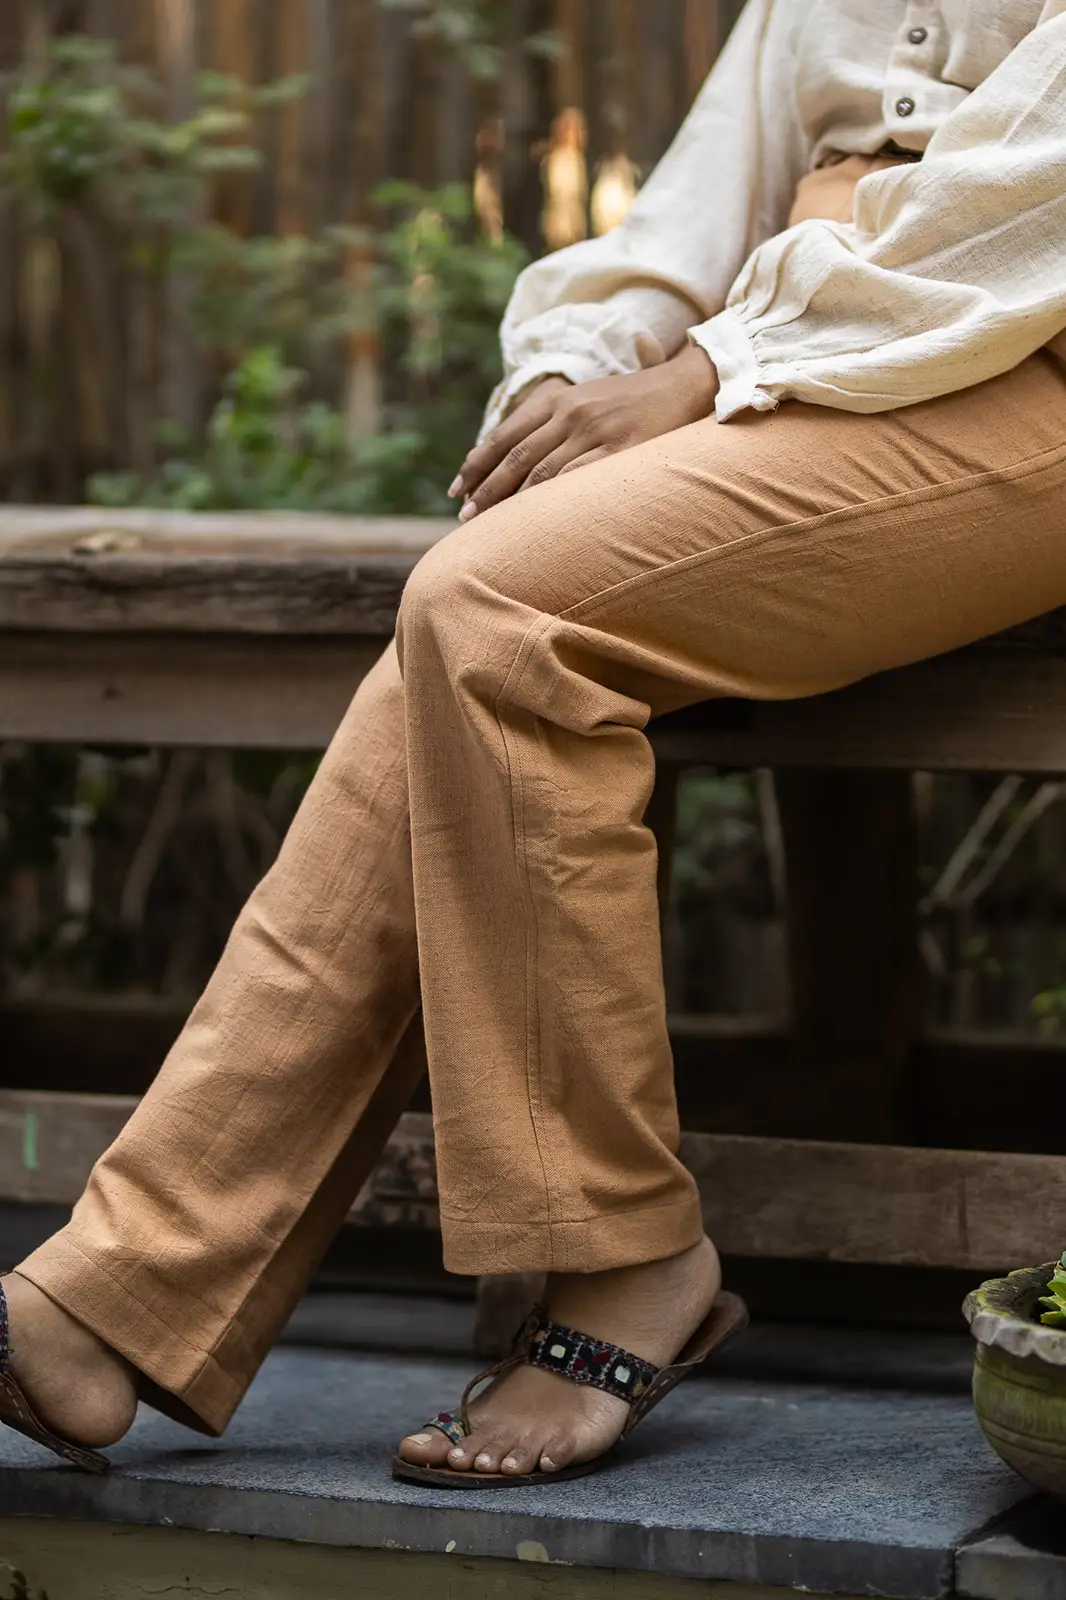 caramel trousers, trousers for womens, women loose trousers, formal women trousers, brown trousers, trousers pants for women, cotton trousers for women, womens cotton trousers, bottom trousers ladies, brown trousers pants